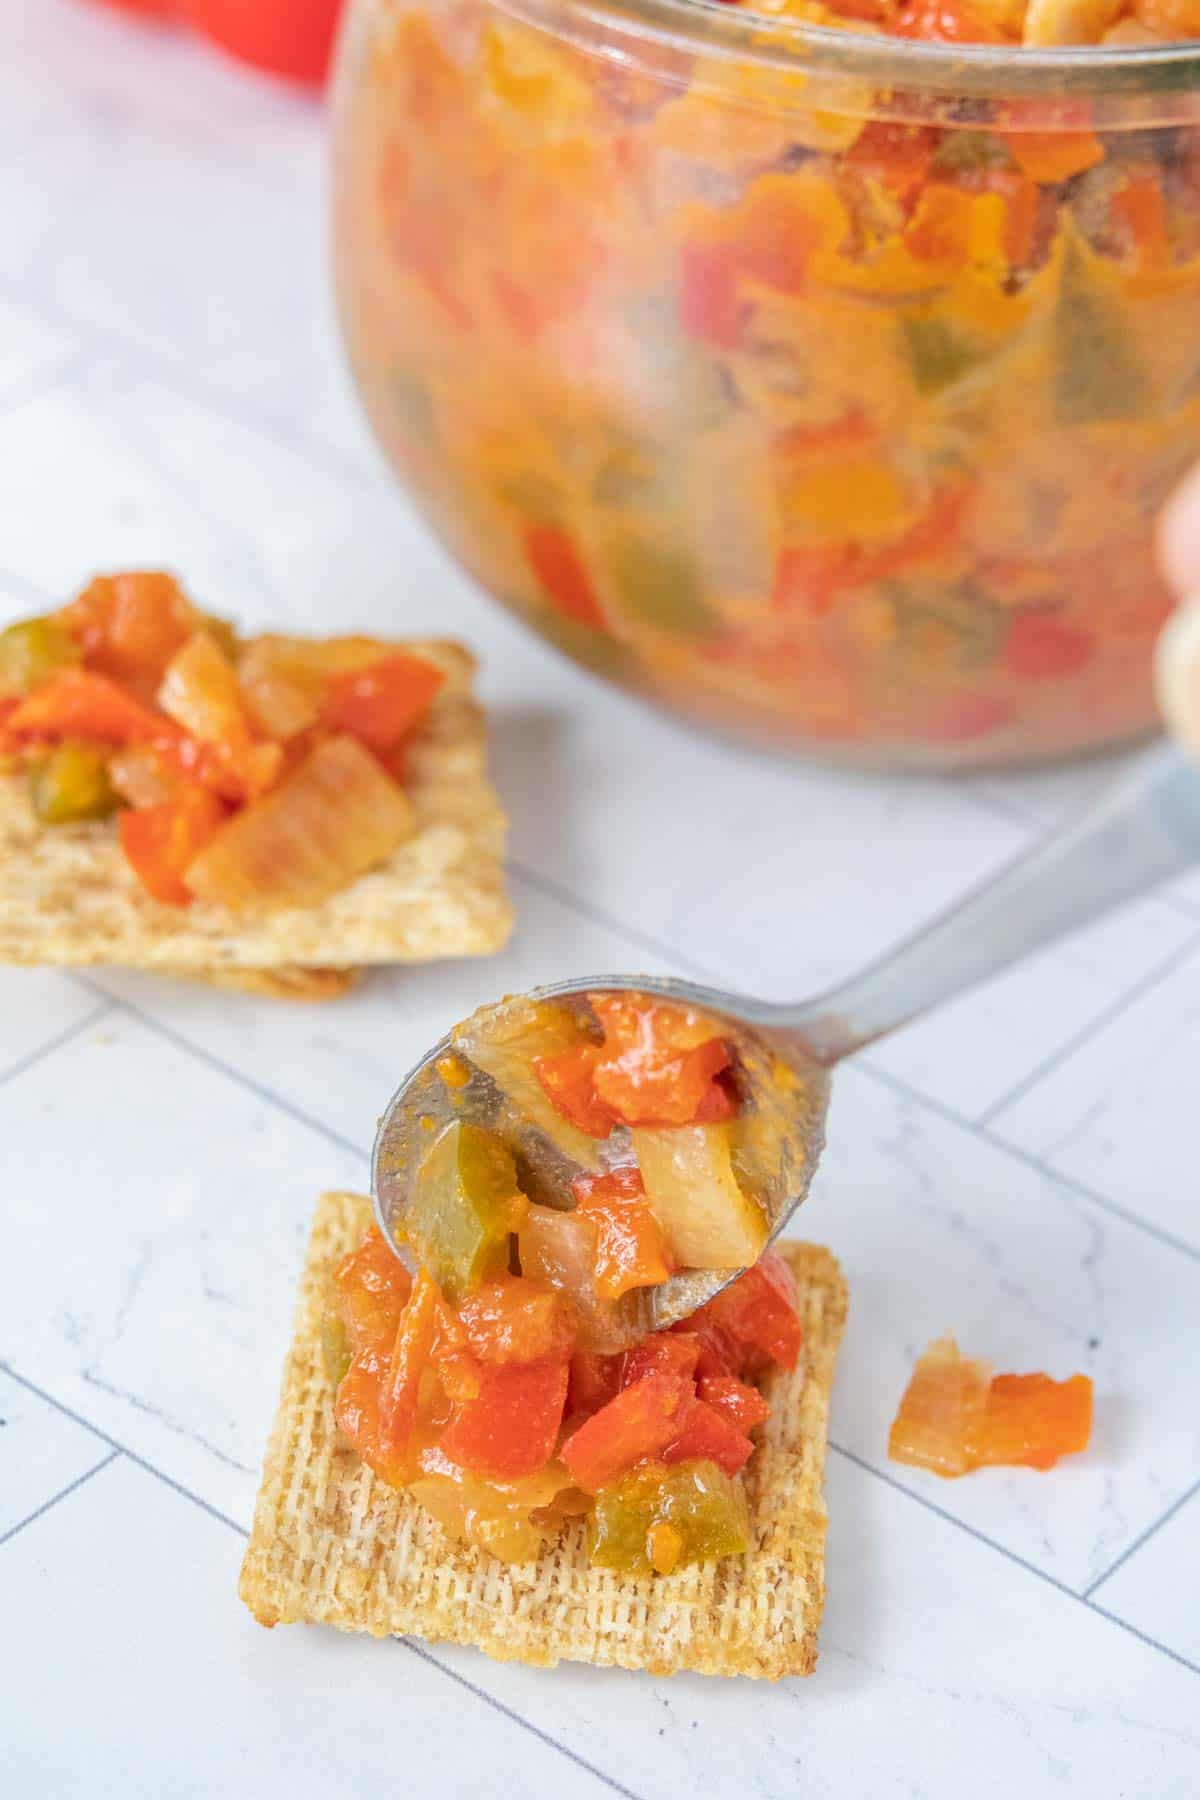 A person is holding a spoonful of salsa on a cracker.